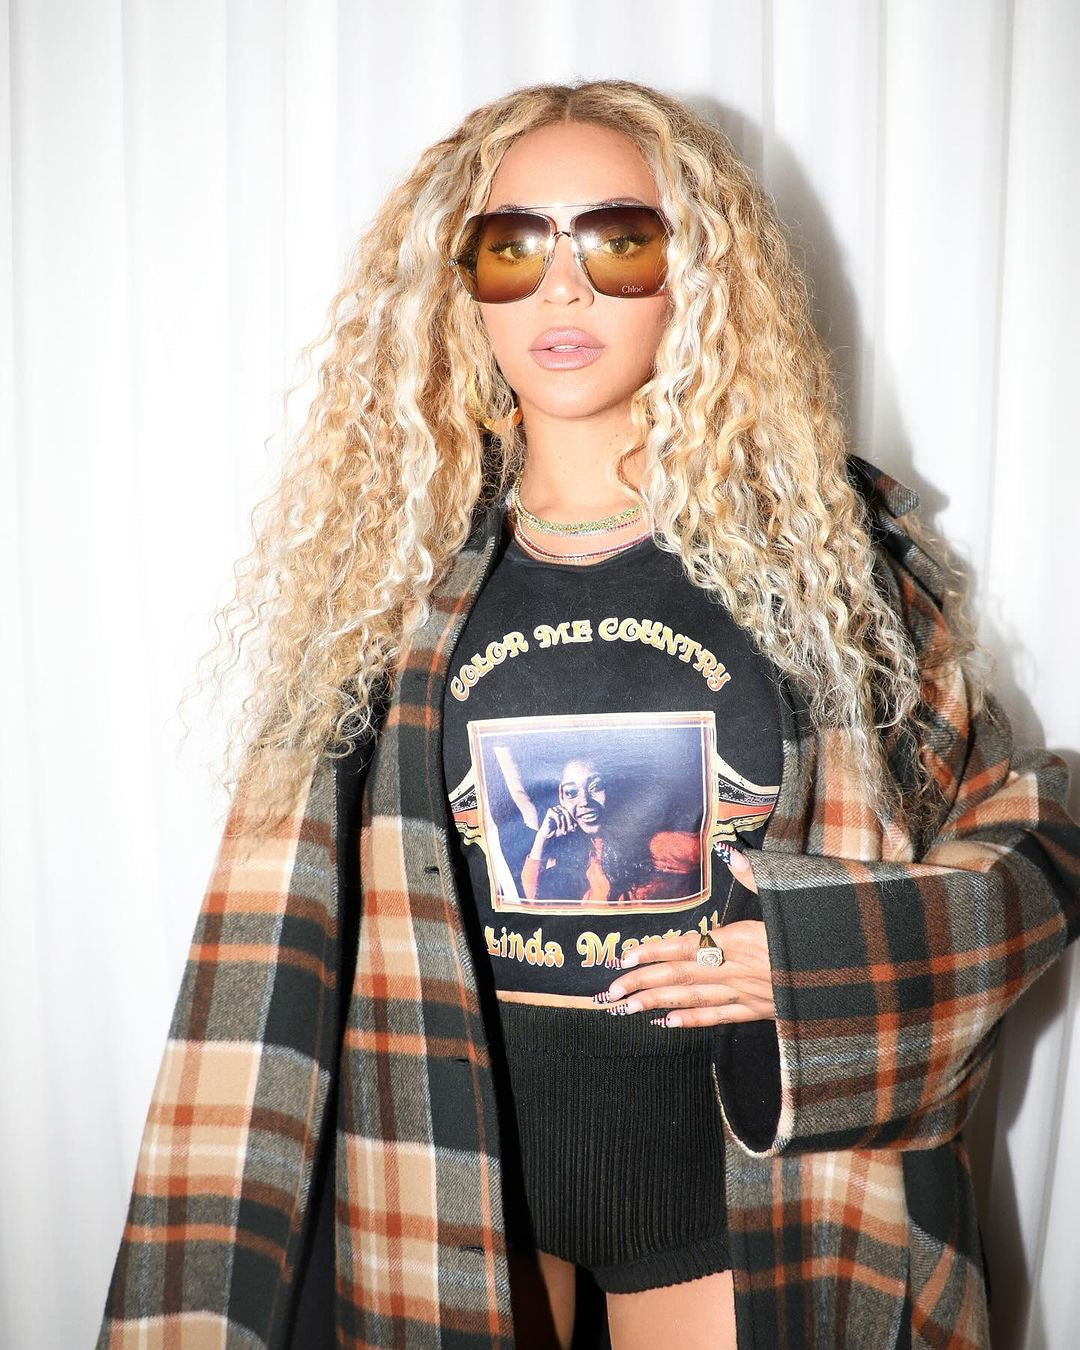 Color me Country Linda Martell Tee (as worn by Beyonce)